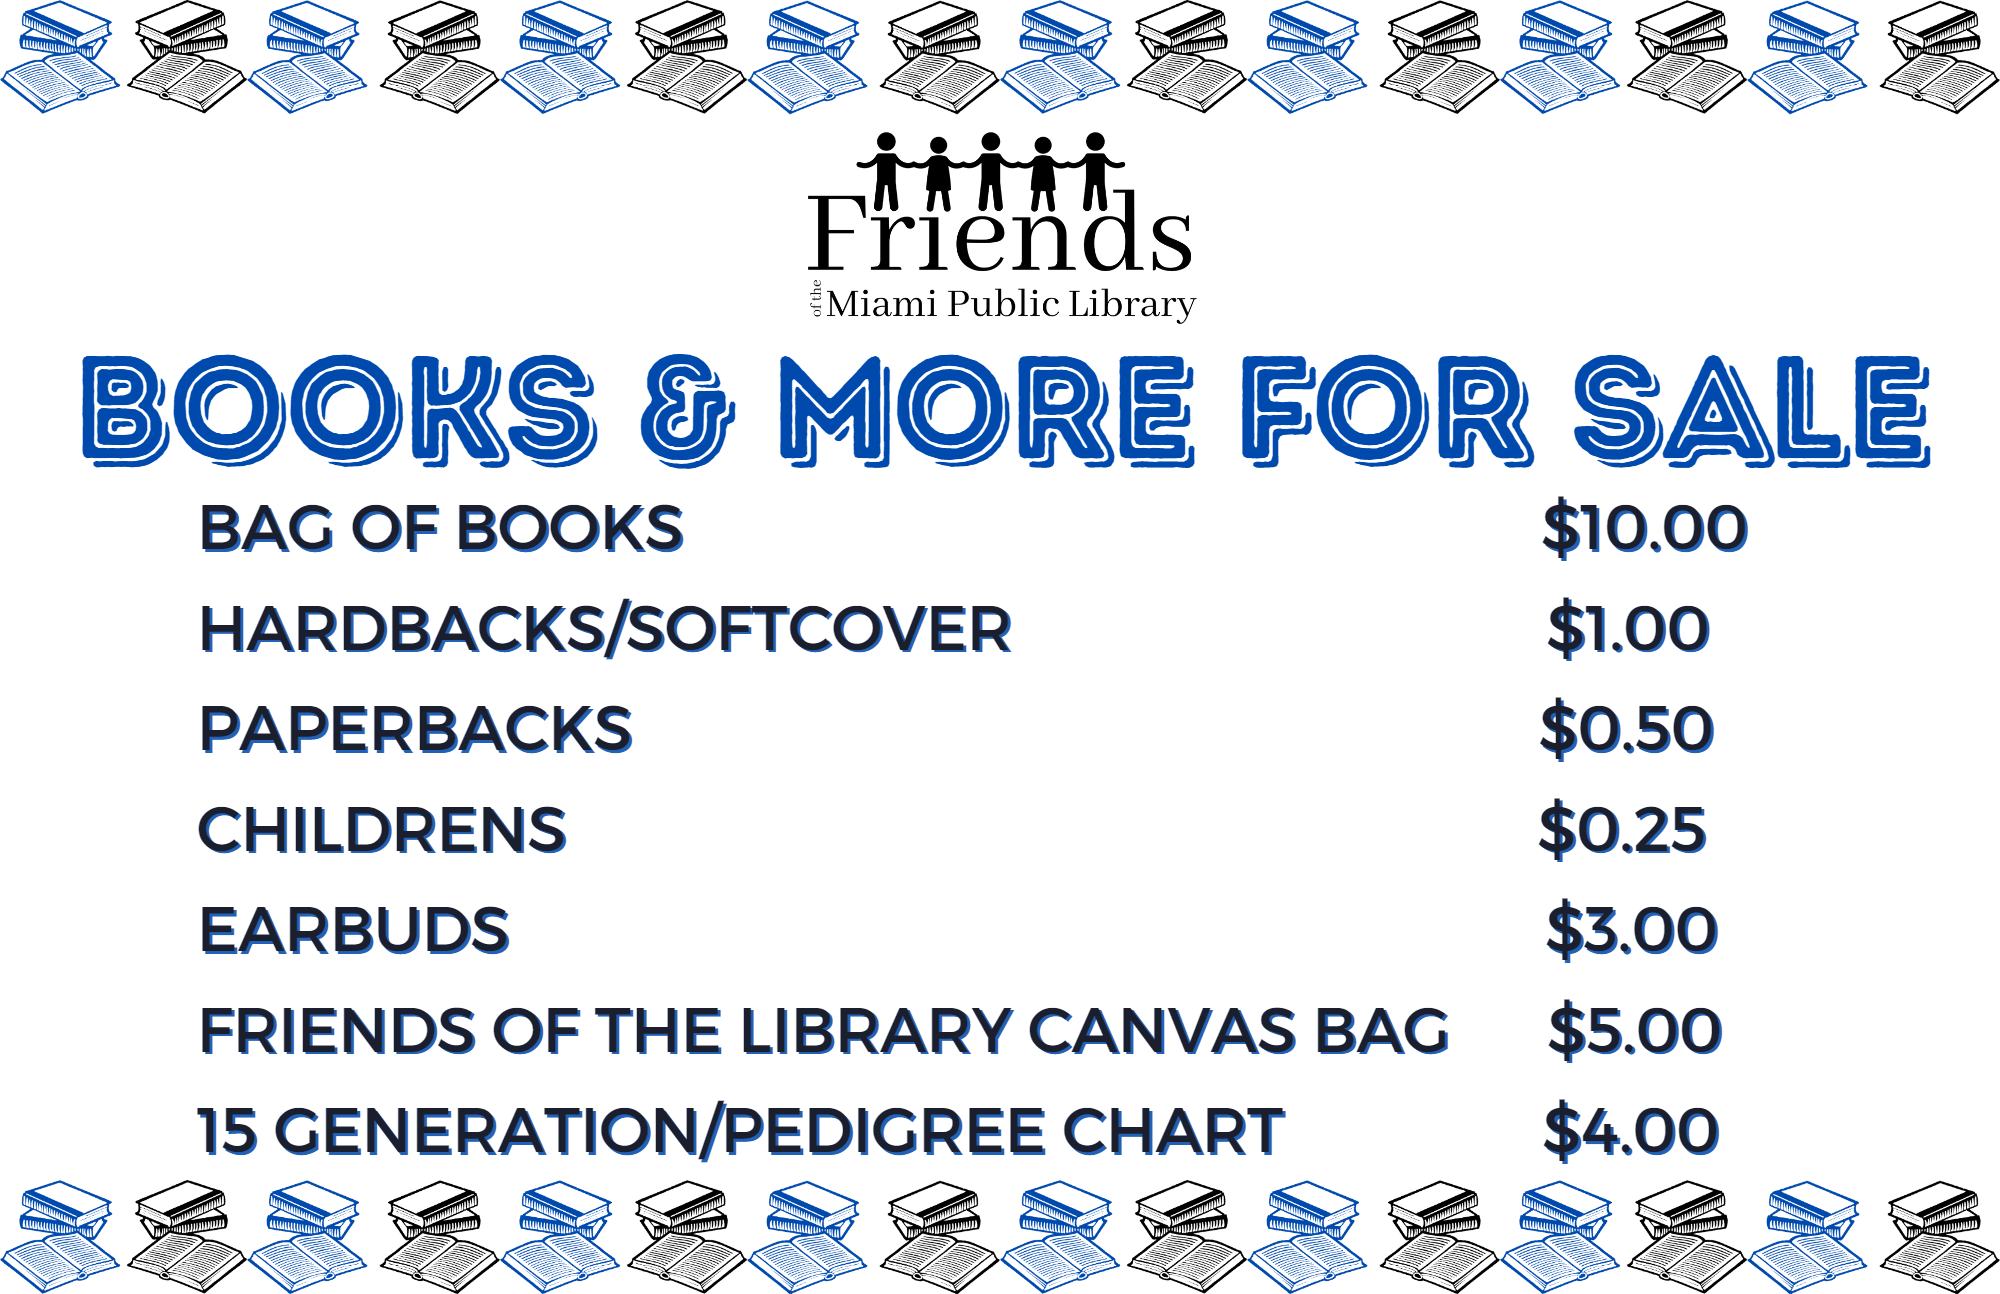 Friends of the Library Books and More Bag of Books $10.00 Hardbacks/Softcover $1.00 Paperbacks $0.50 Childrens $0.25 Earbuds $3.00 Friends of the Library Canvas Bag $5.00 15 Generation/Pedigree Chart $4.00